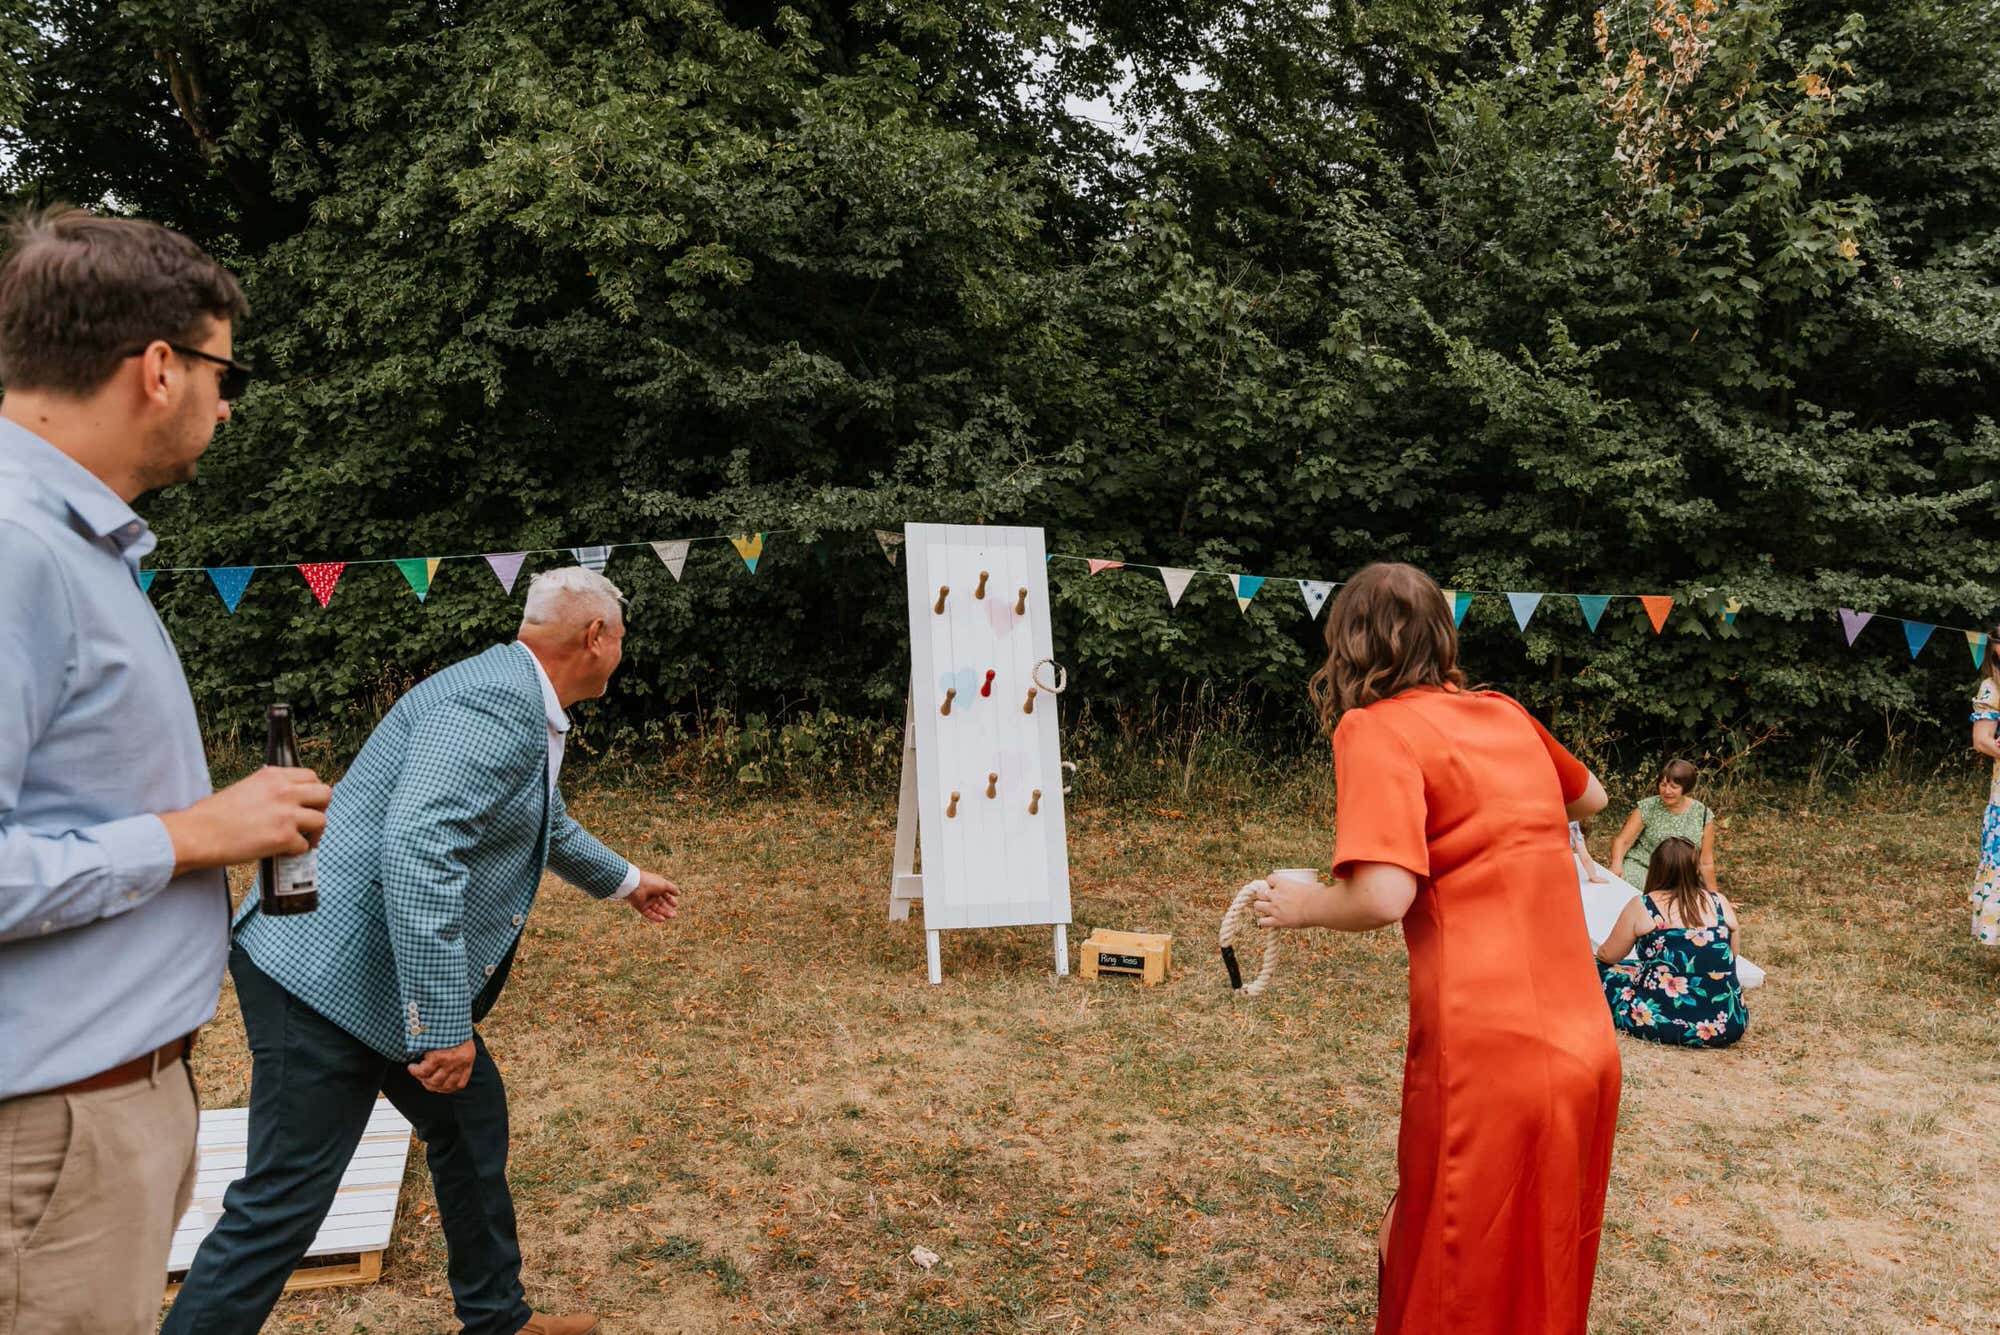 lawn games at the wedding in the field